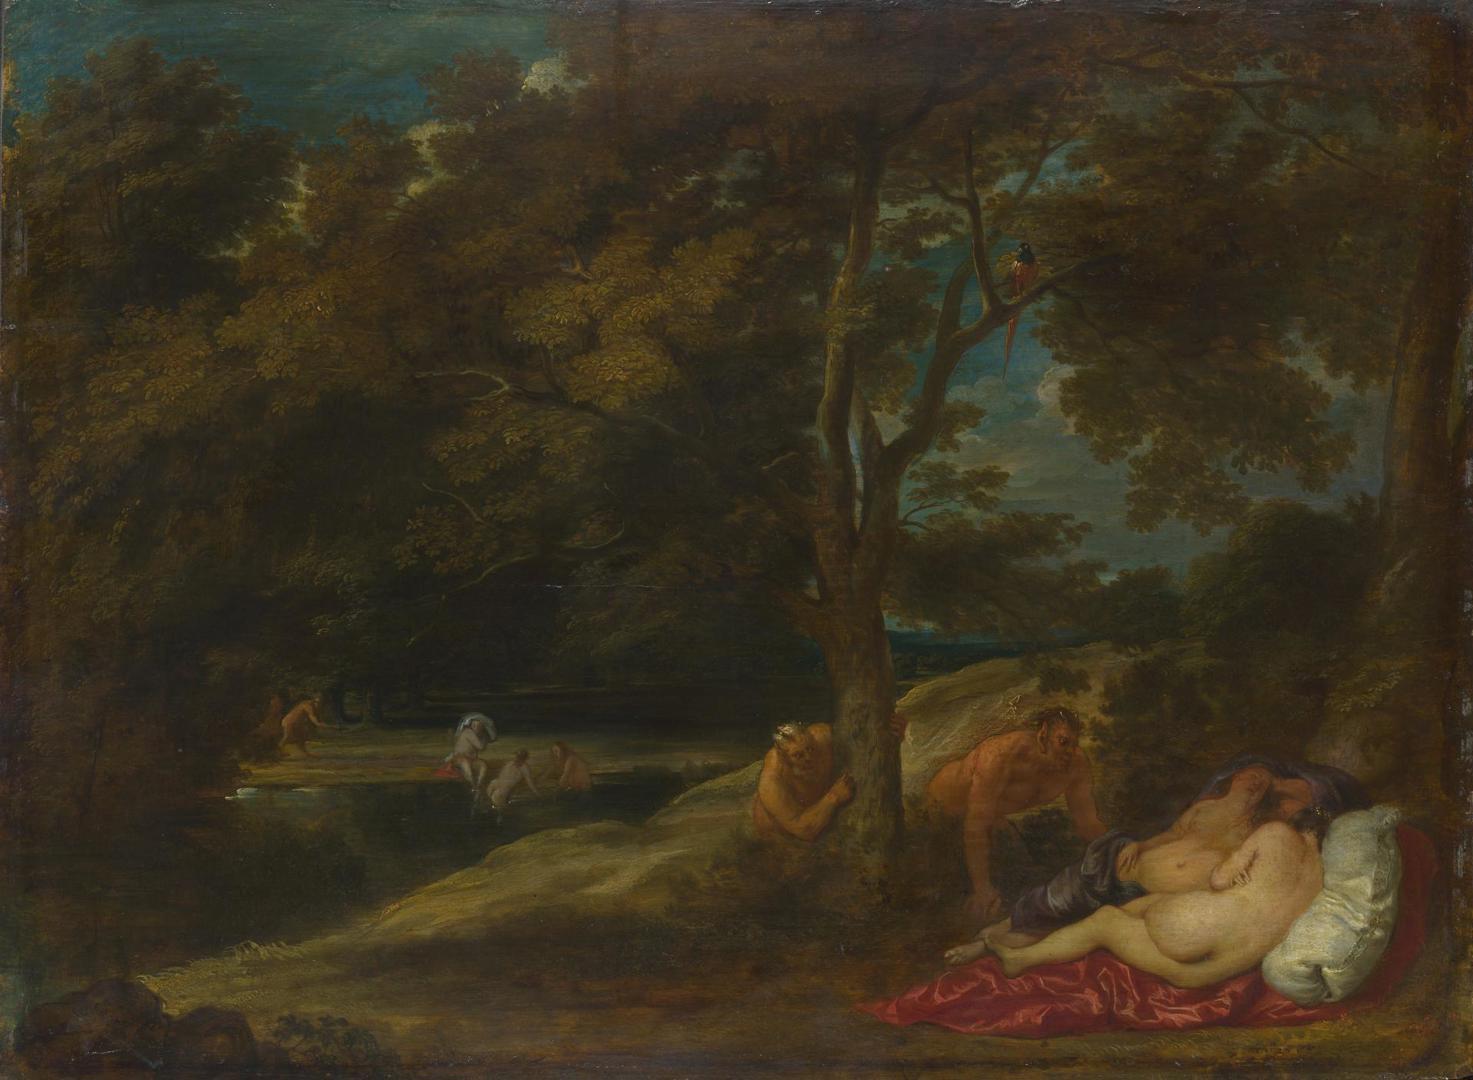 Nymphs surprised by Satyrs by Franchoys Wouters